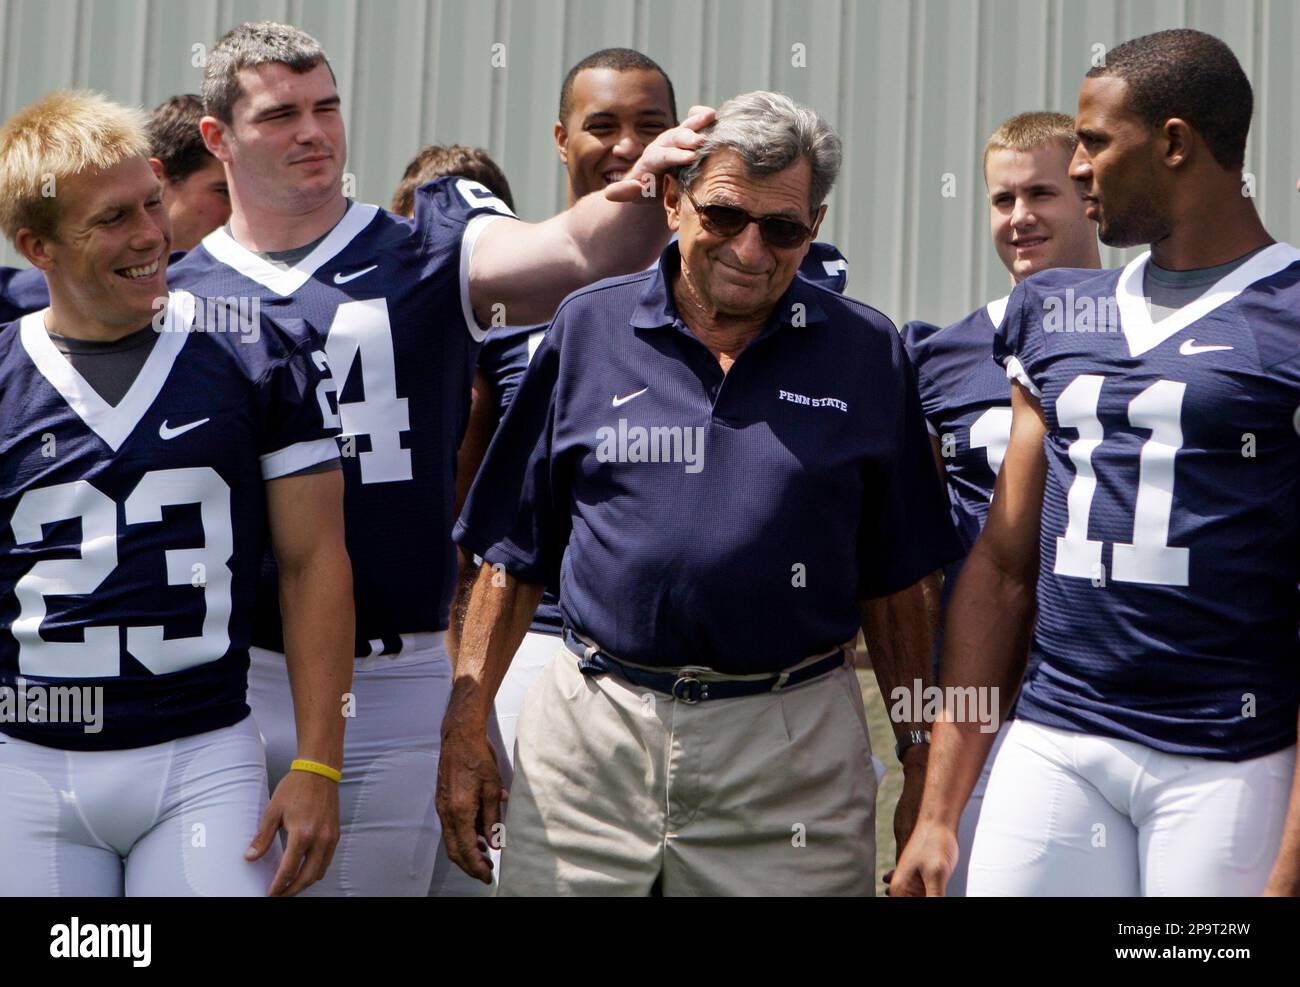 Penn State guard Rich Ohrnberger, second from left, reaches out and fixes  coach Joe Paterno's hair during team photos in State College, Friday, Aug.  8, 2008. Left is kicker Kevin Kelly (23)